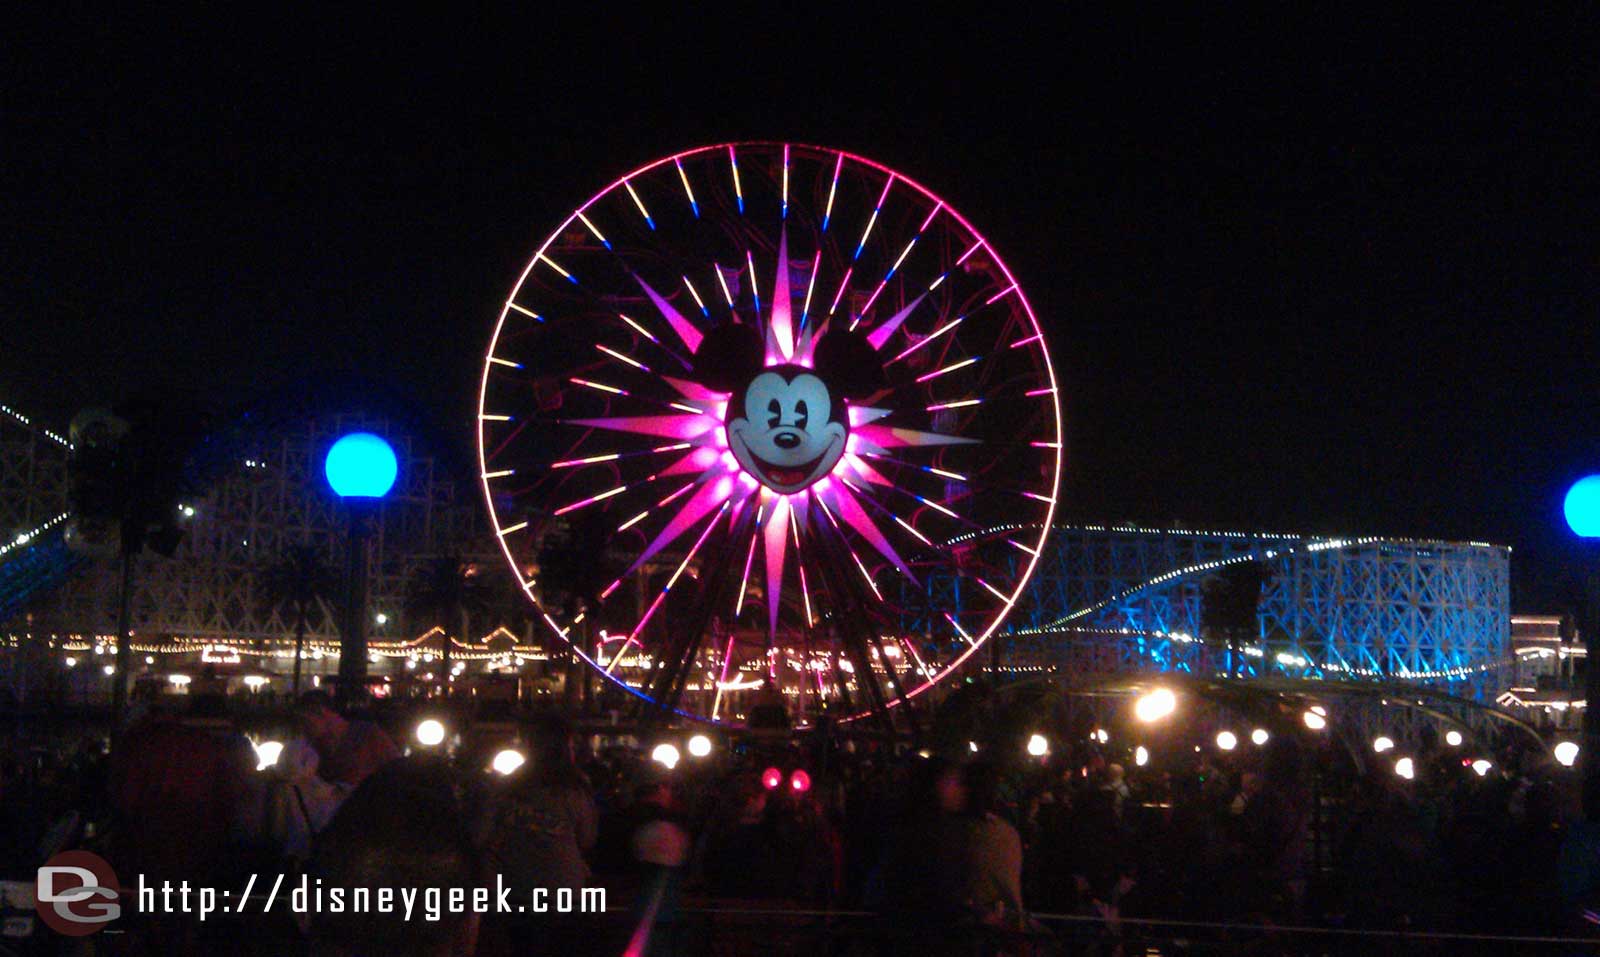 Waiting for World of Color Mickeys Fun Wheel across Paradise Bay